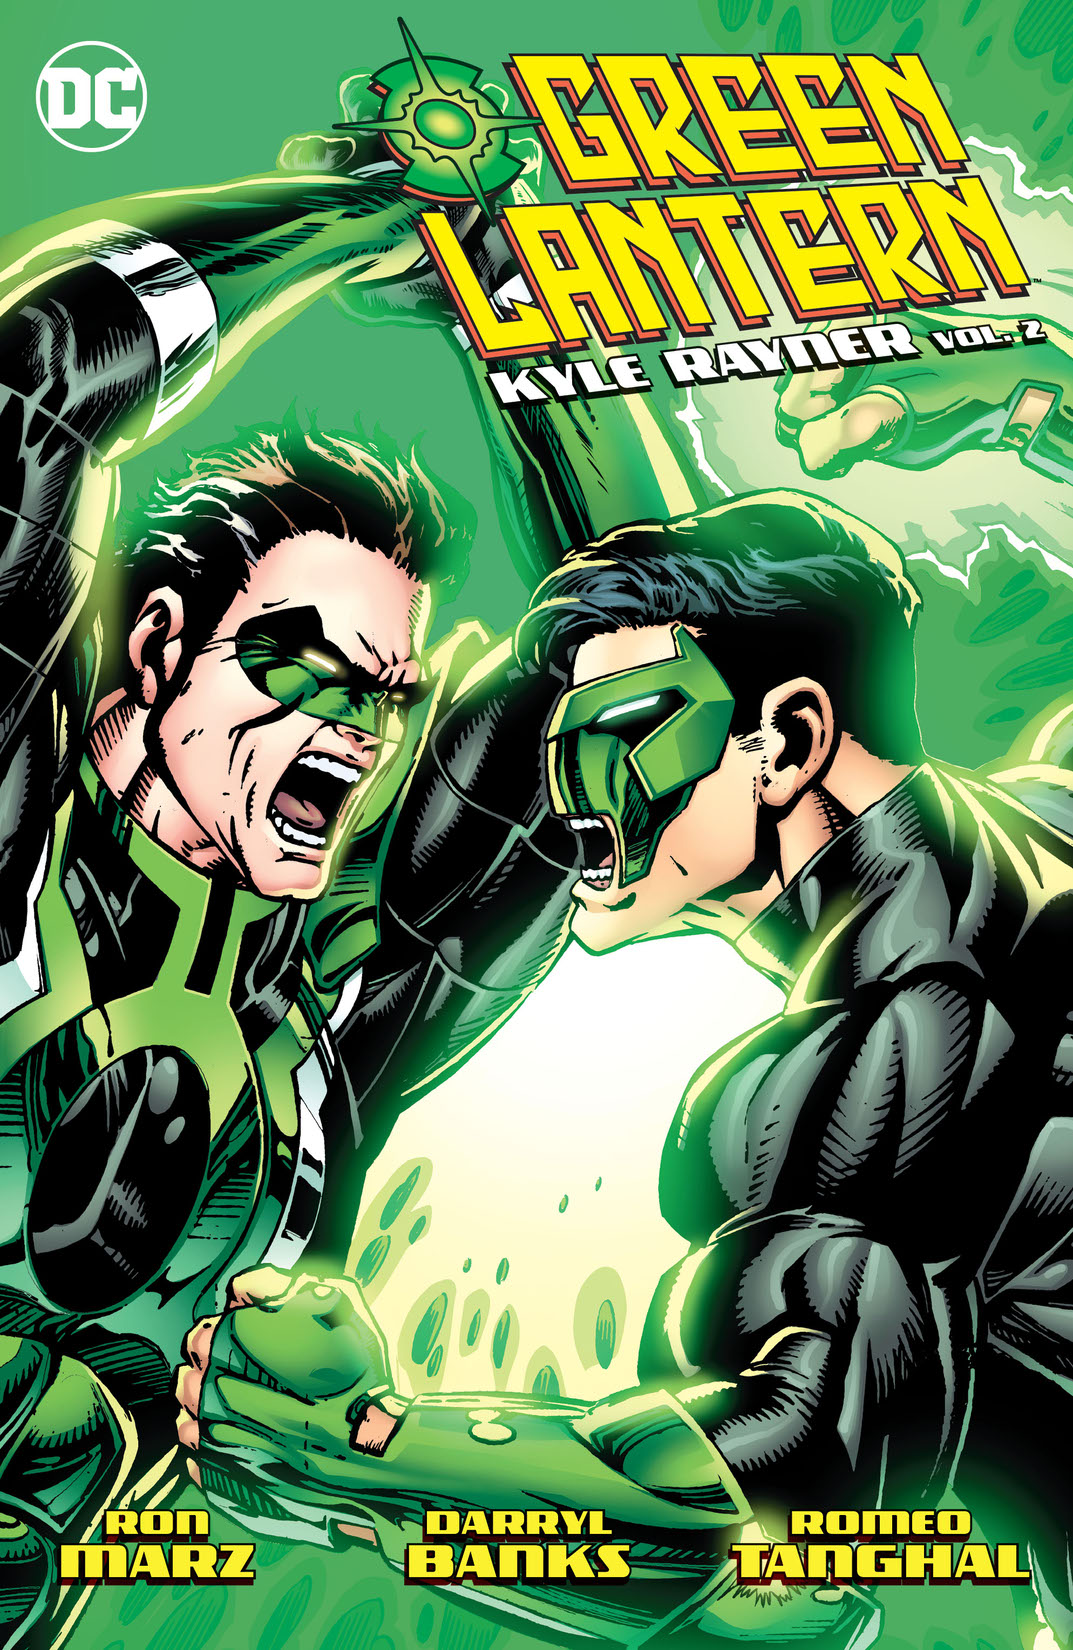 Green Lantern: Kyle Rayner Vol. 2 preview images